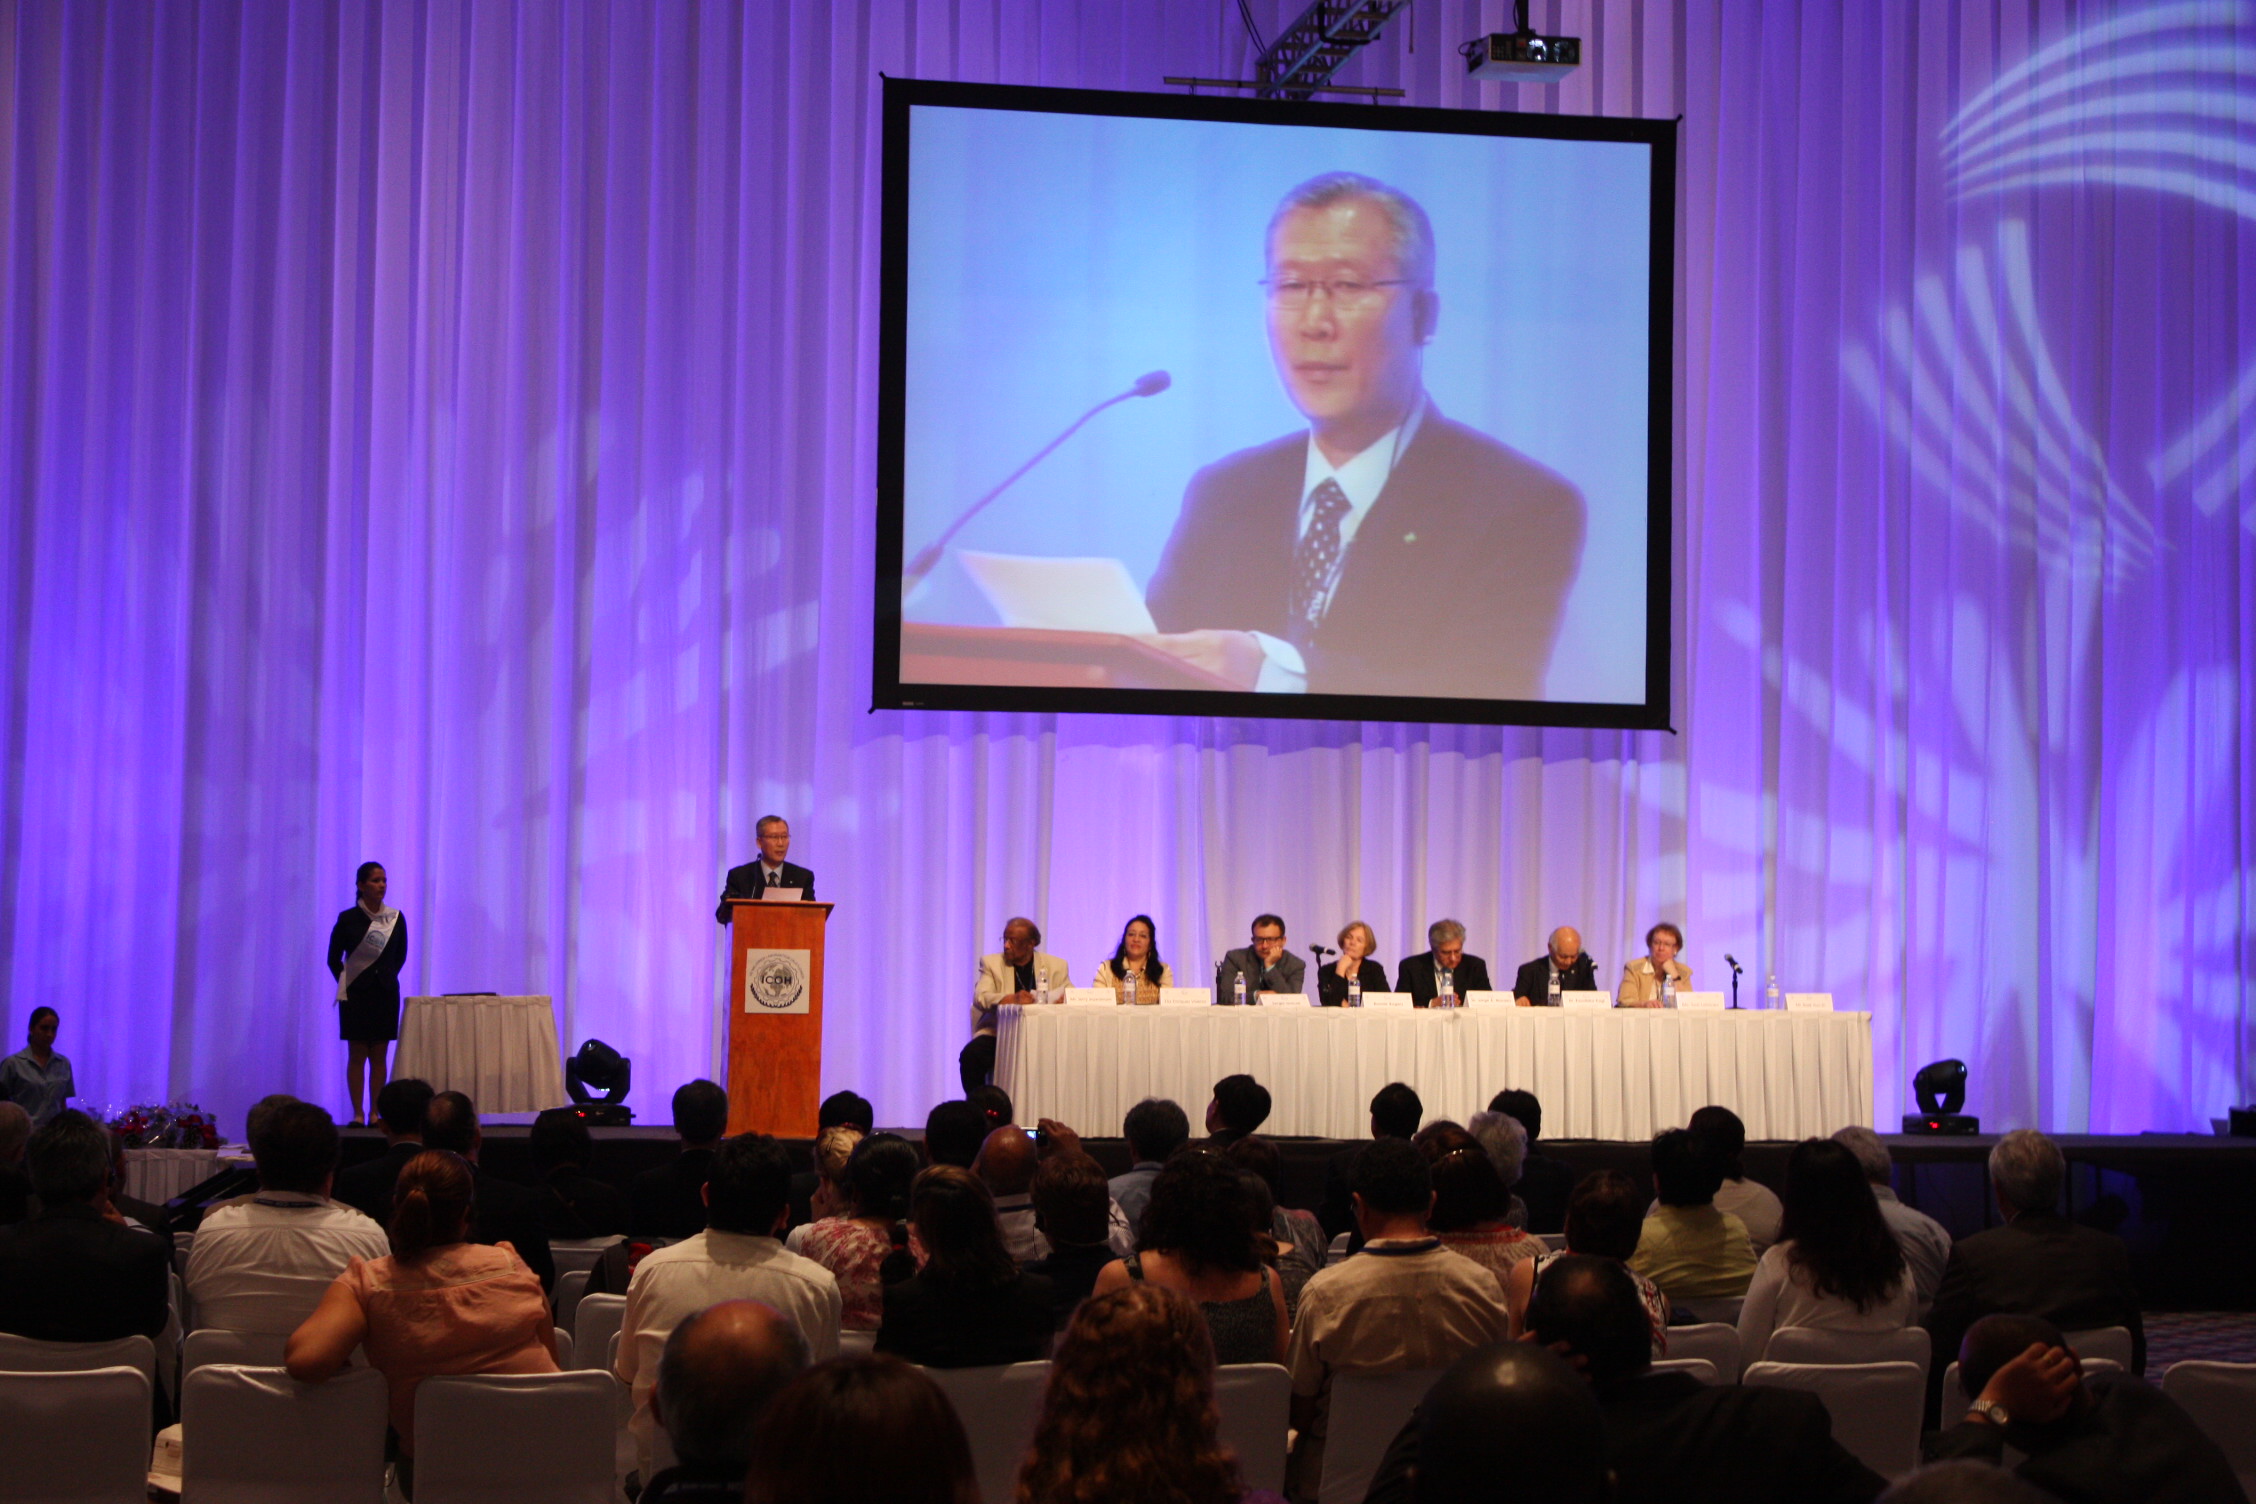 the 30th International Congress on Occupational Health